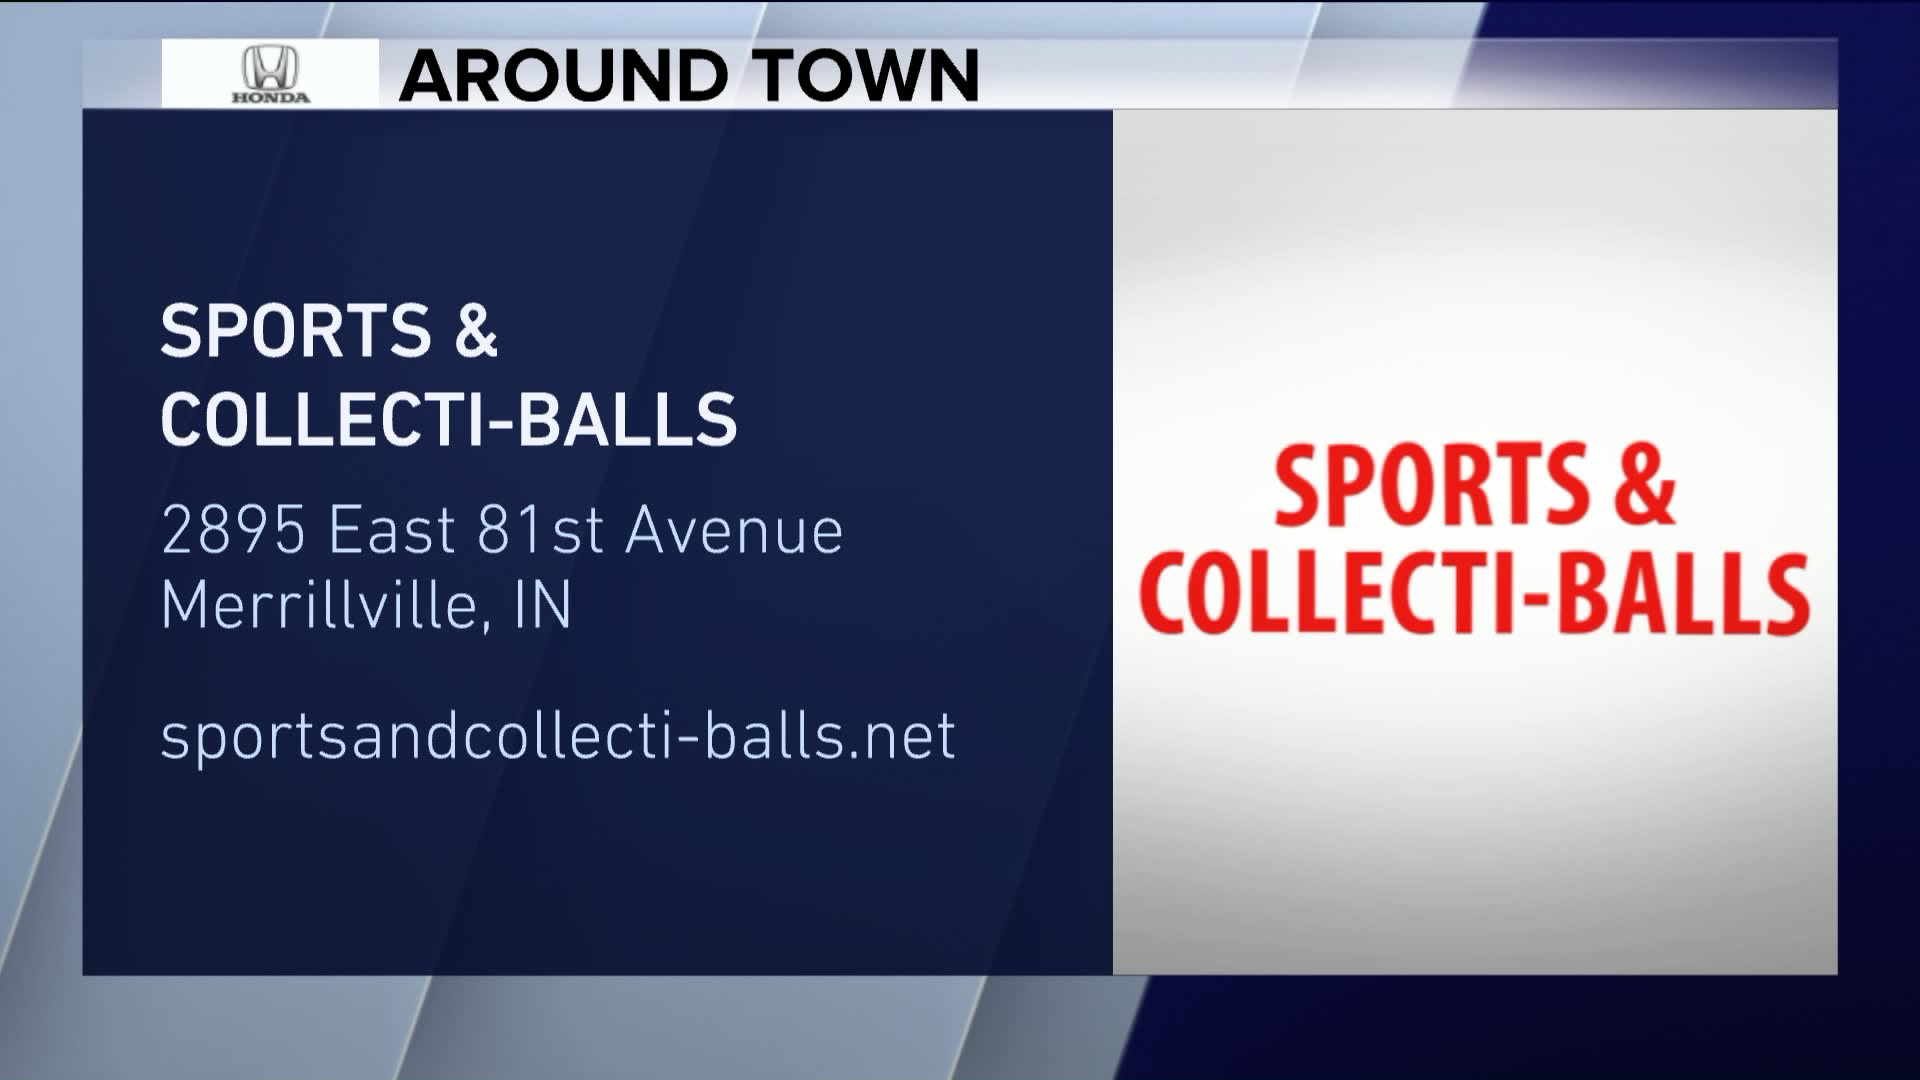 Around Town checks out Sports and Collecti-balls